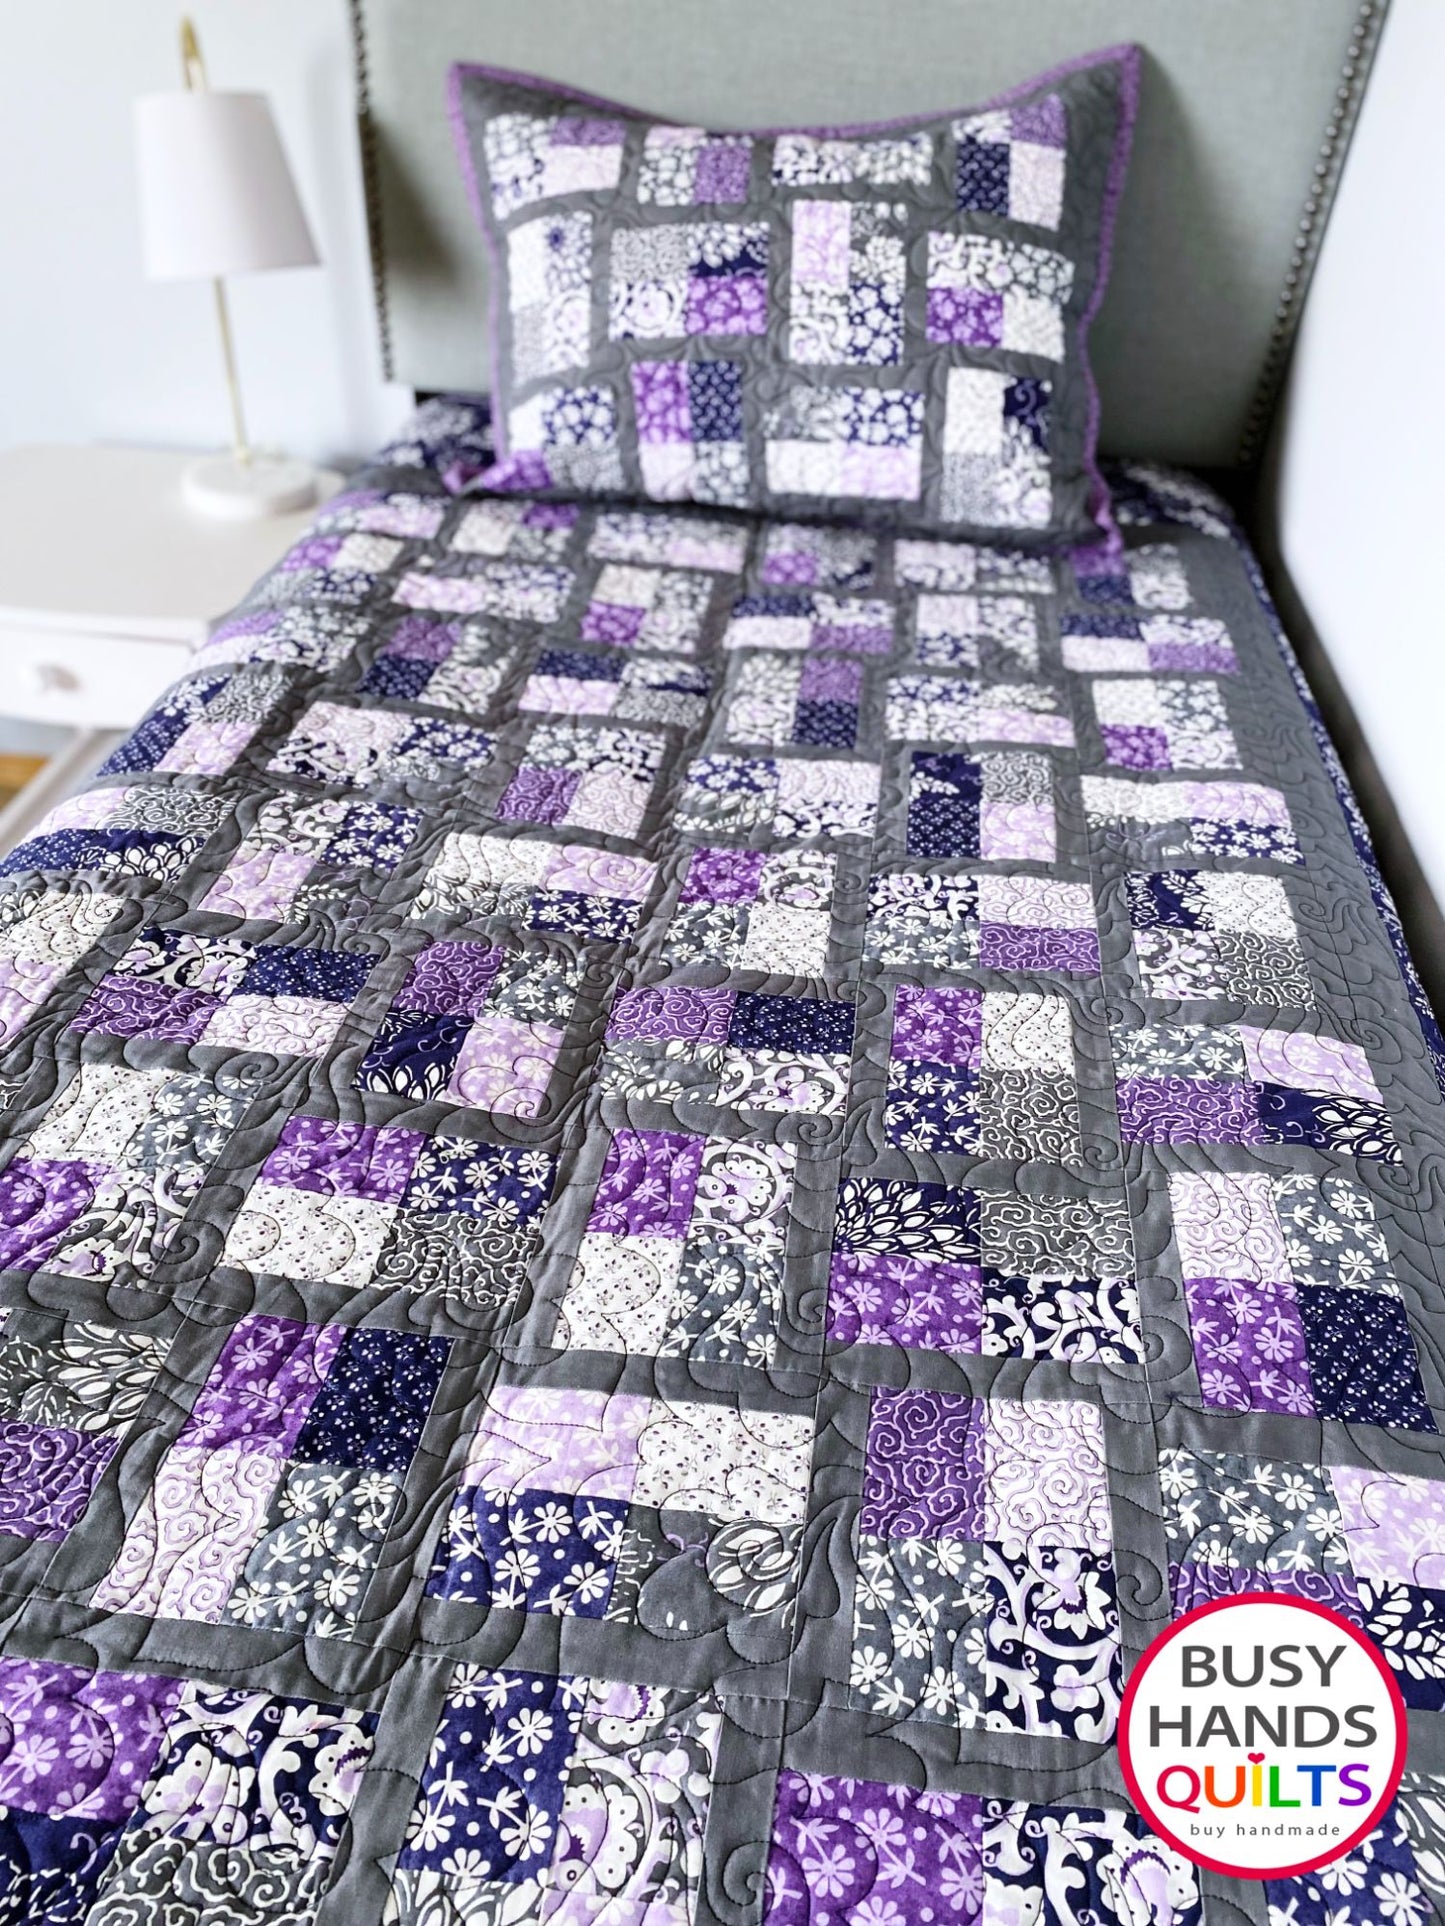 Handmade Phoebe Twin Bed Quilt With Matching Pillow Sham